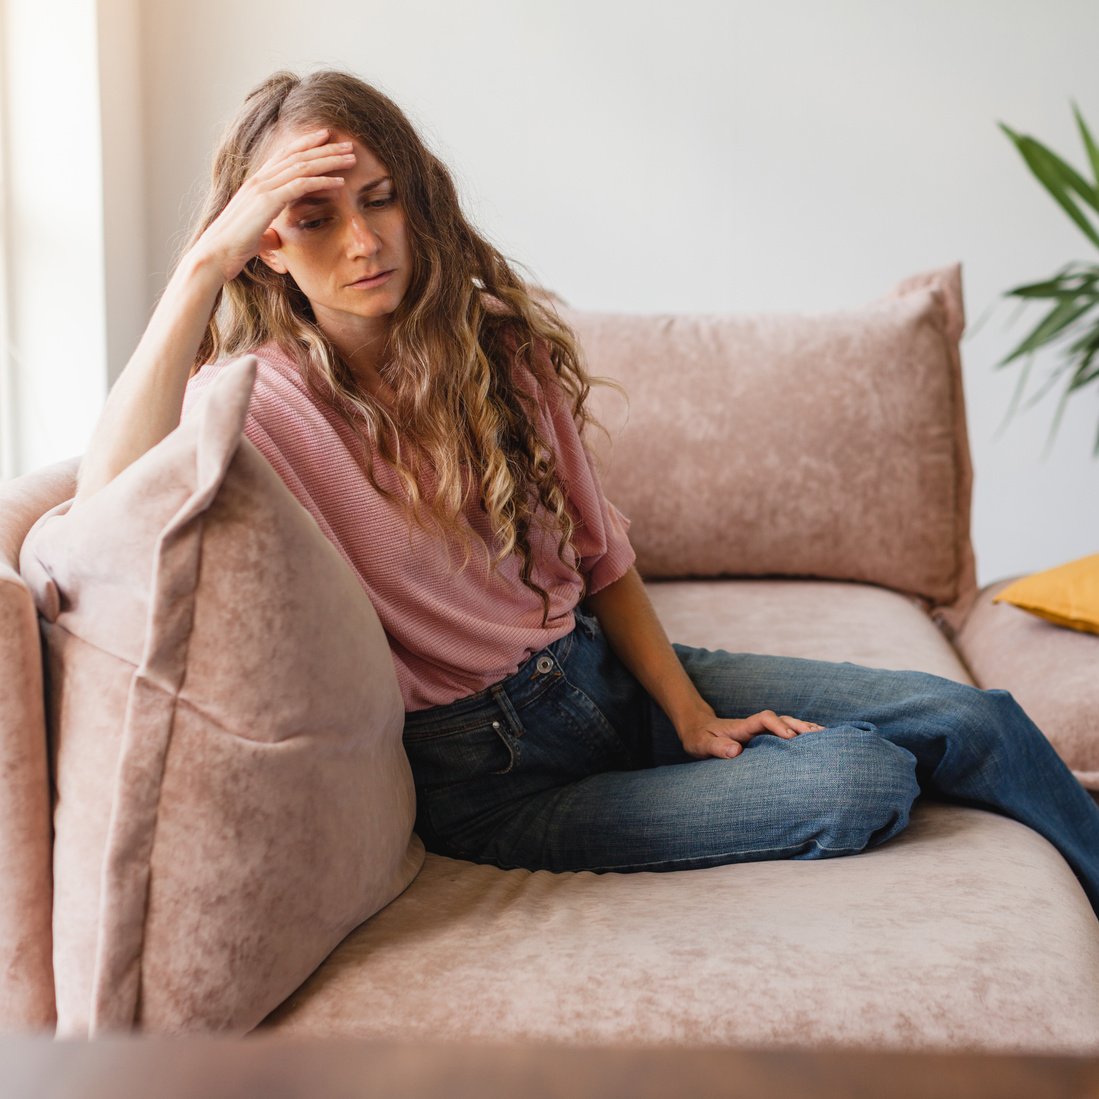 Sad woman thinking about problem, sitting alone on couch